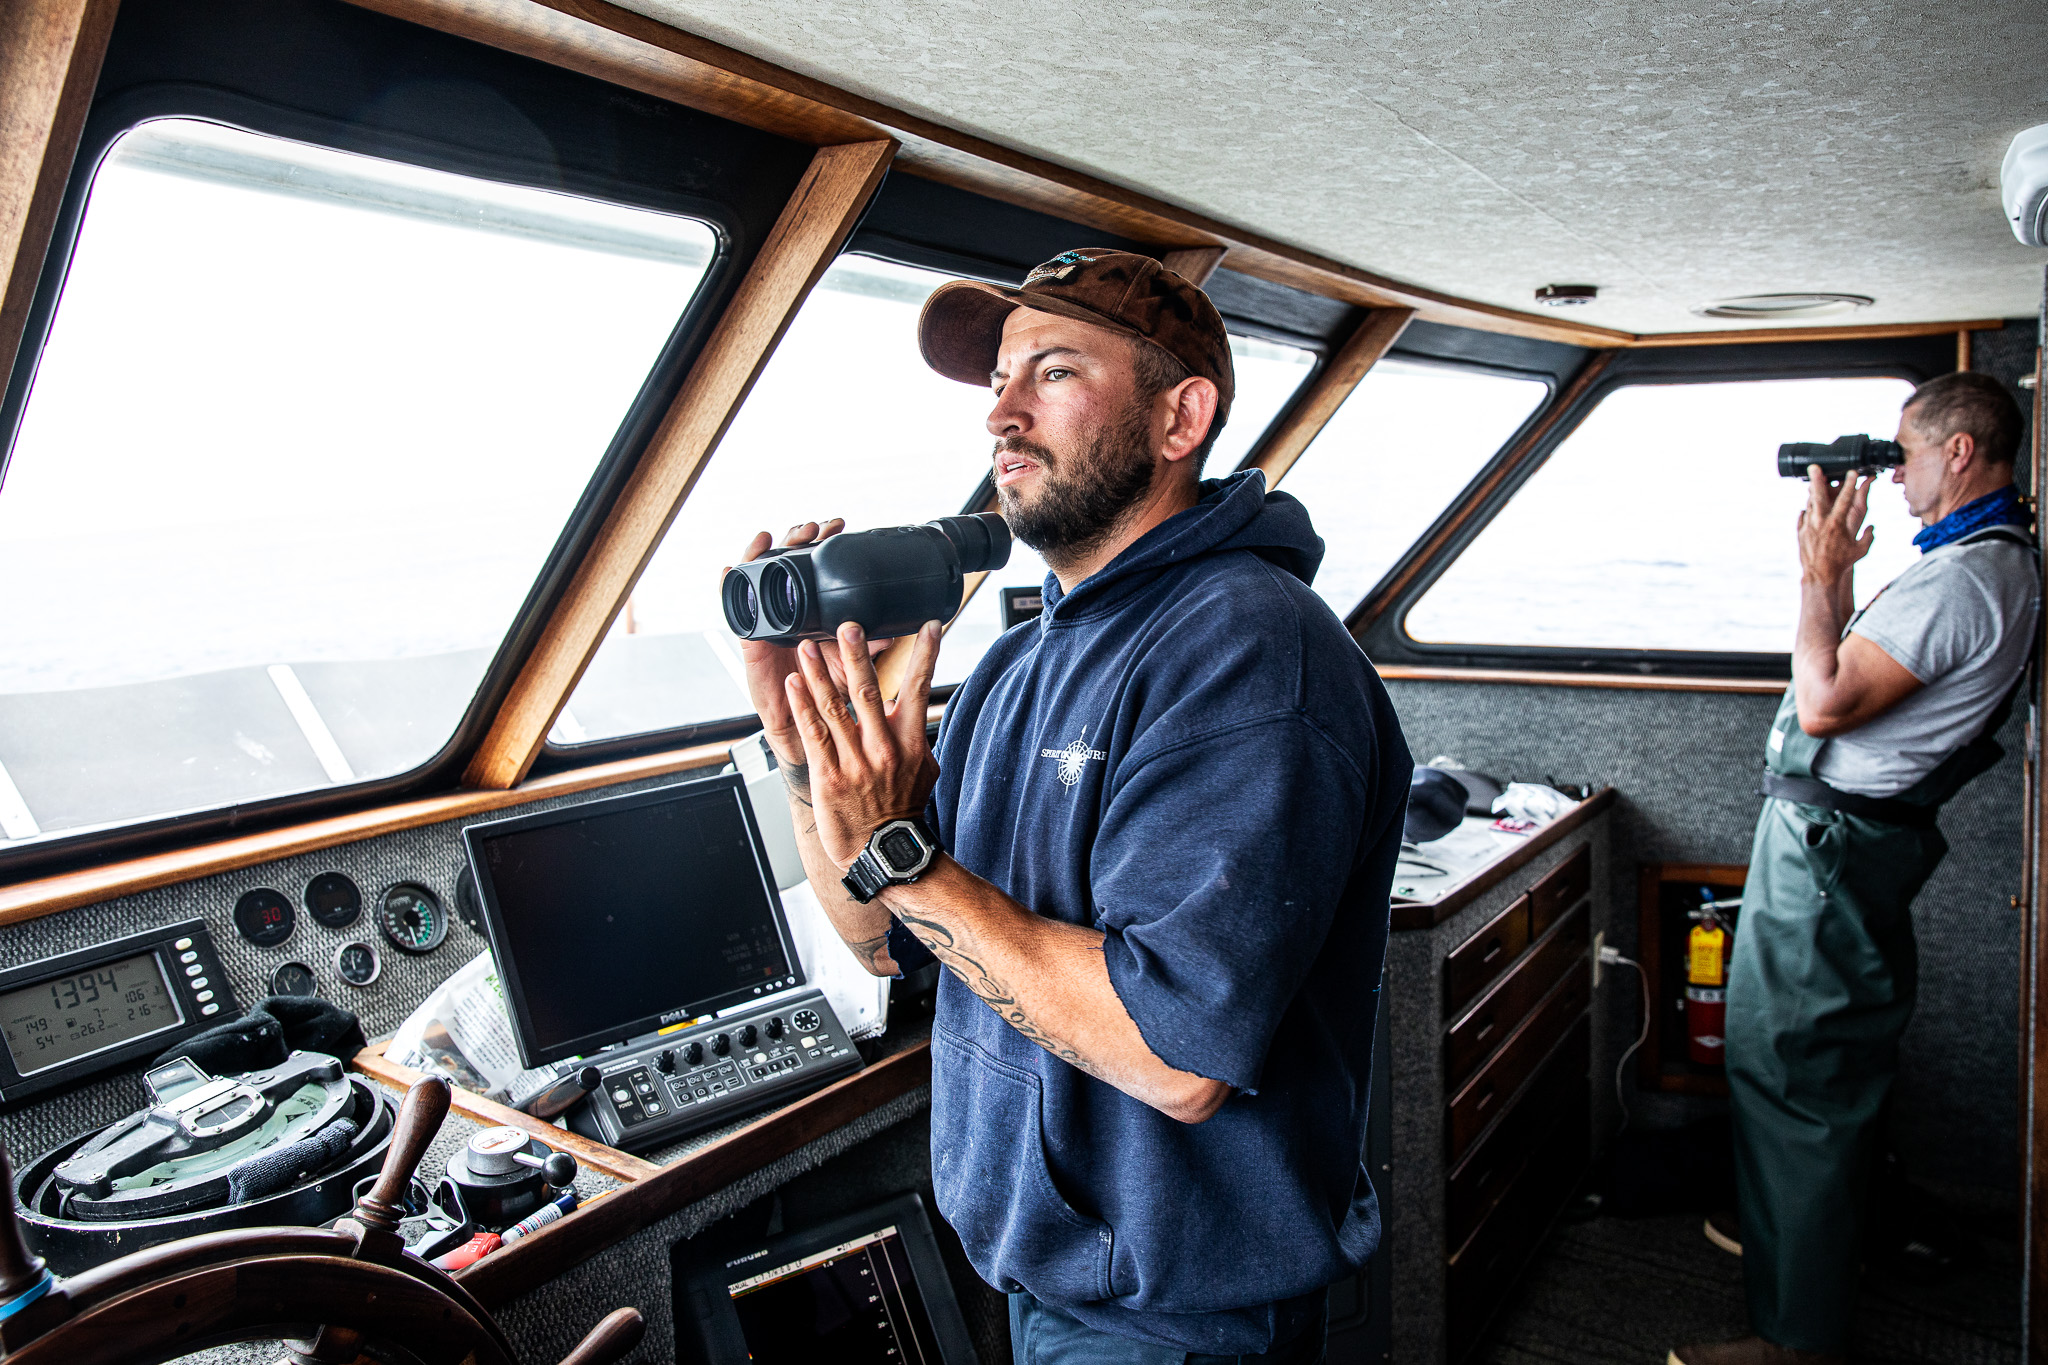 A captain at the helm of a charter ship scouts for fish.